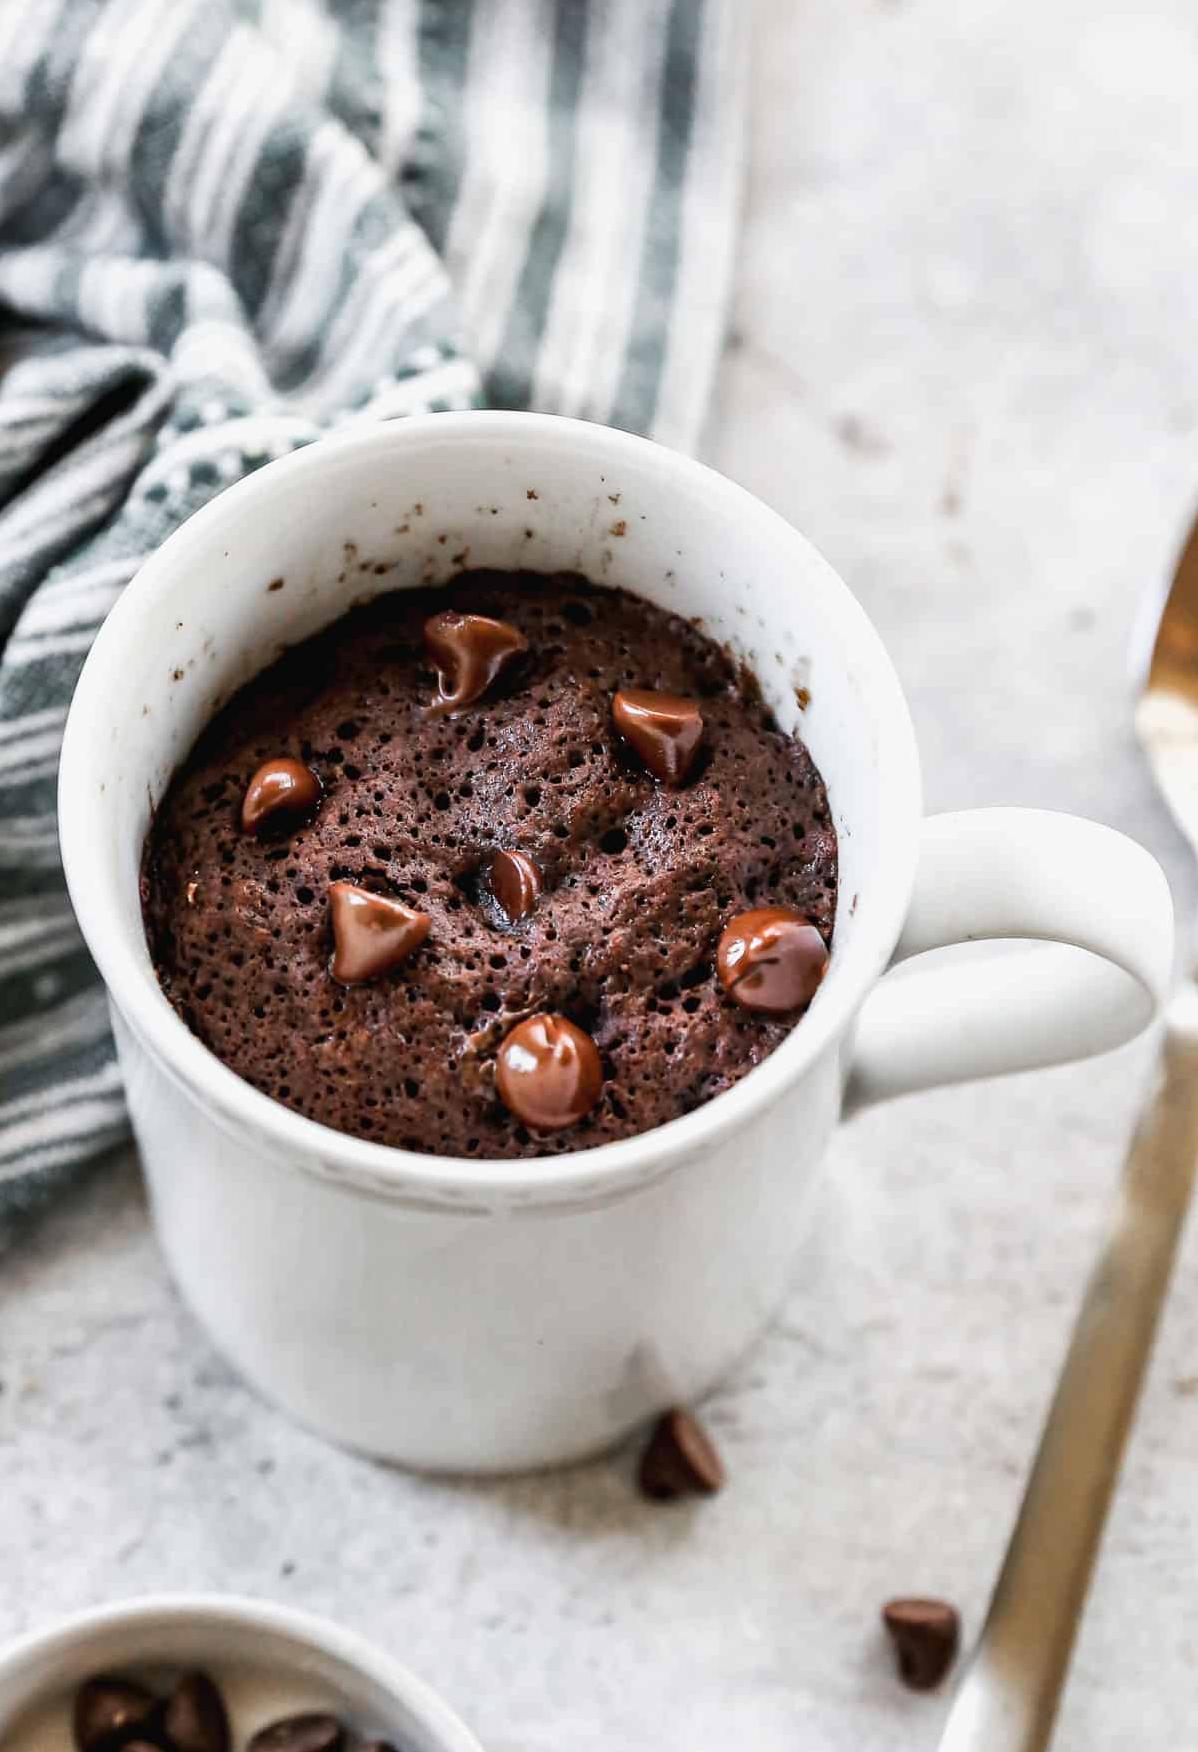  With just a few simple ingredients and a microwave, you can make this decadent cake right in your coffee mug.